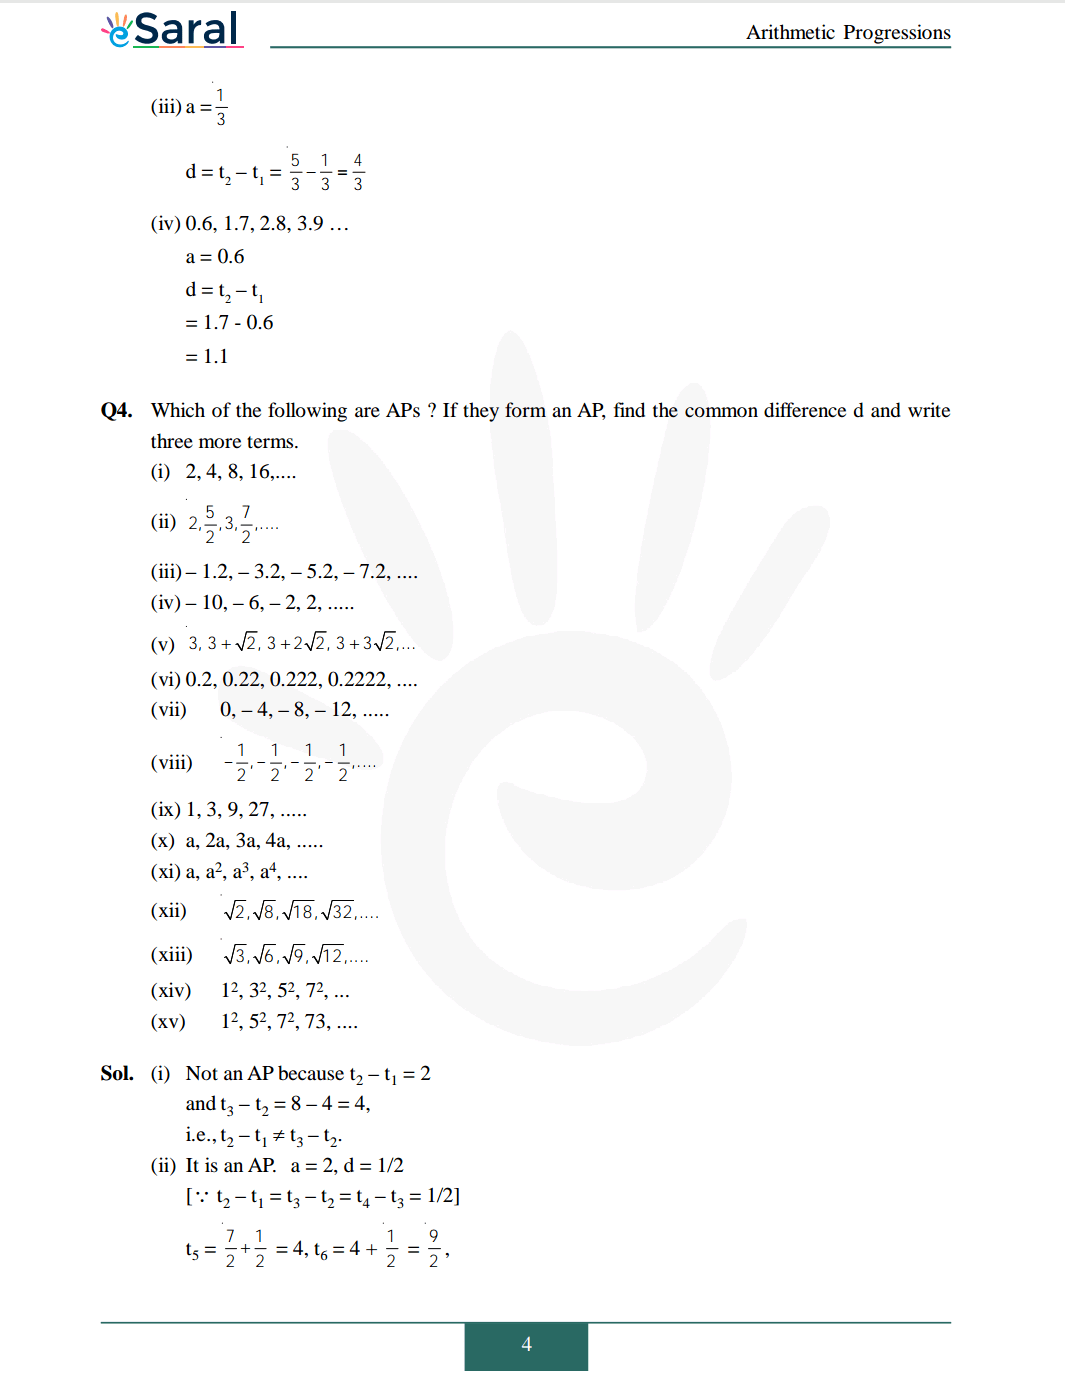 Class 10 Maths Chapter 5 exercise 5.1 solutions Image 4